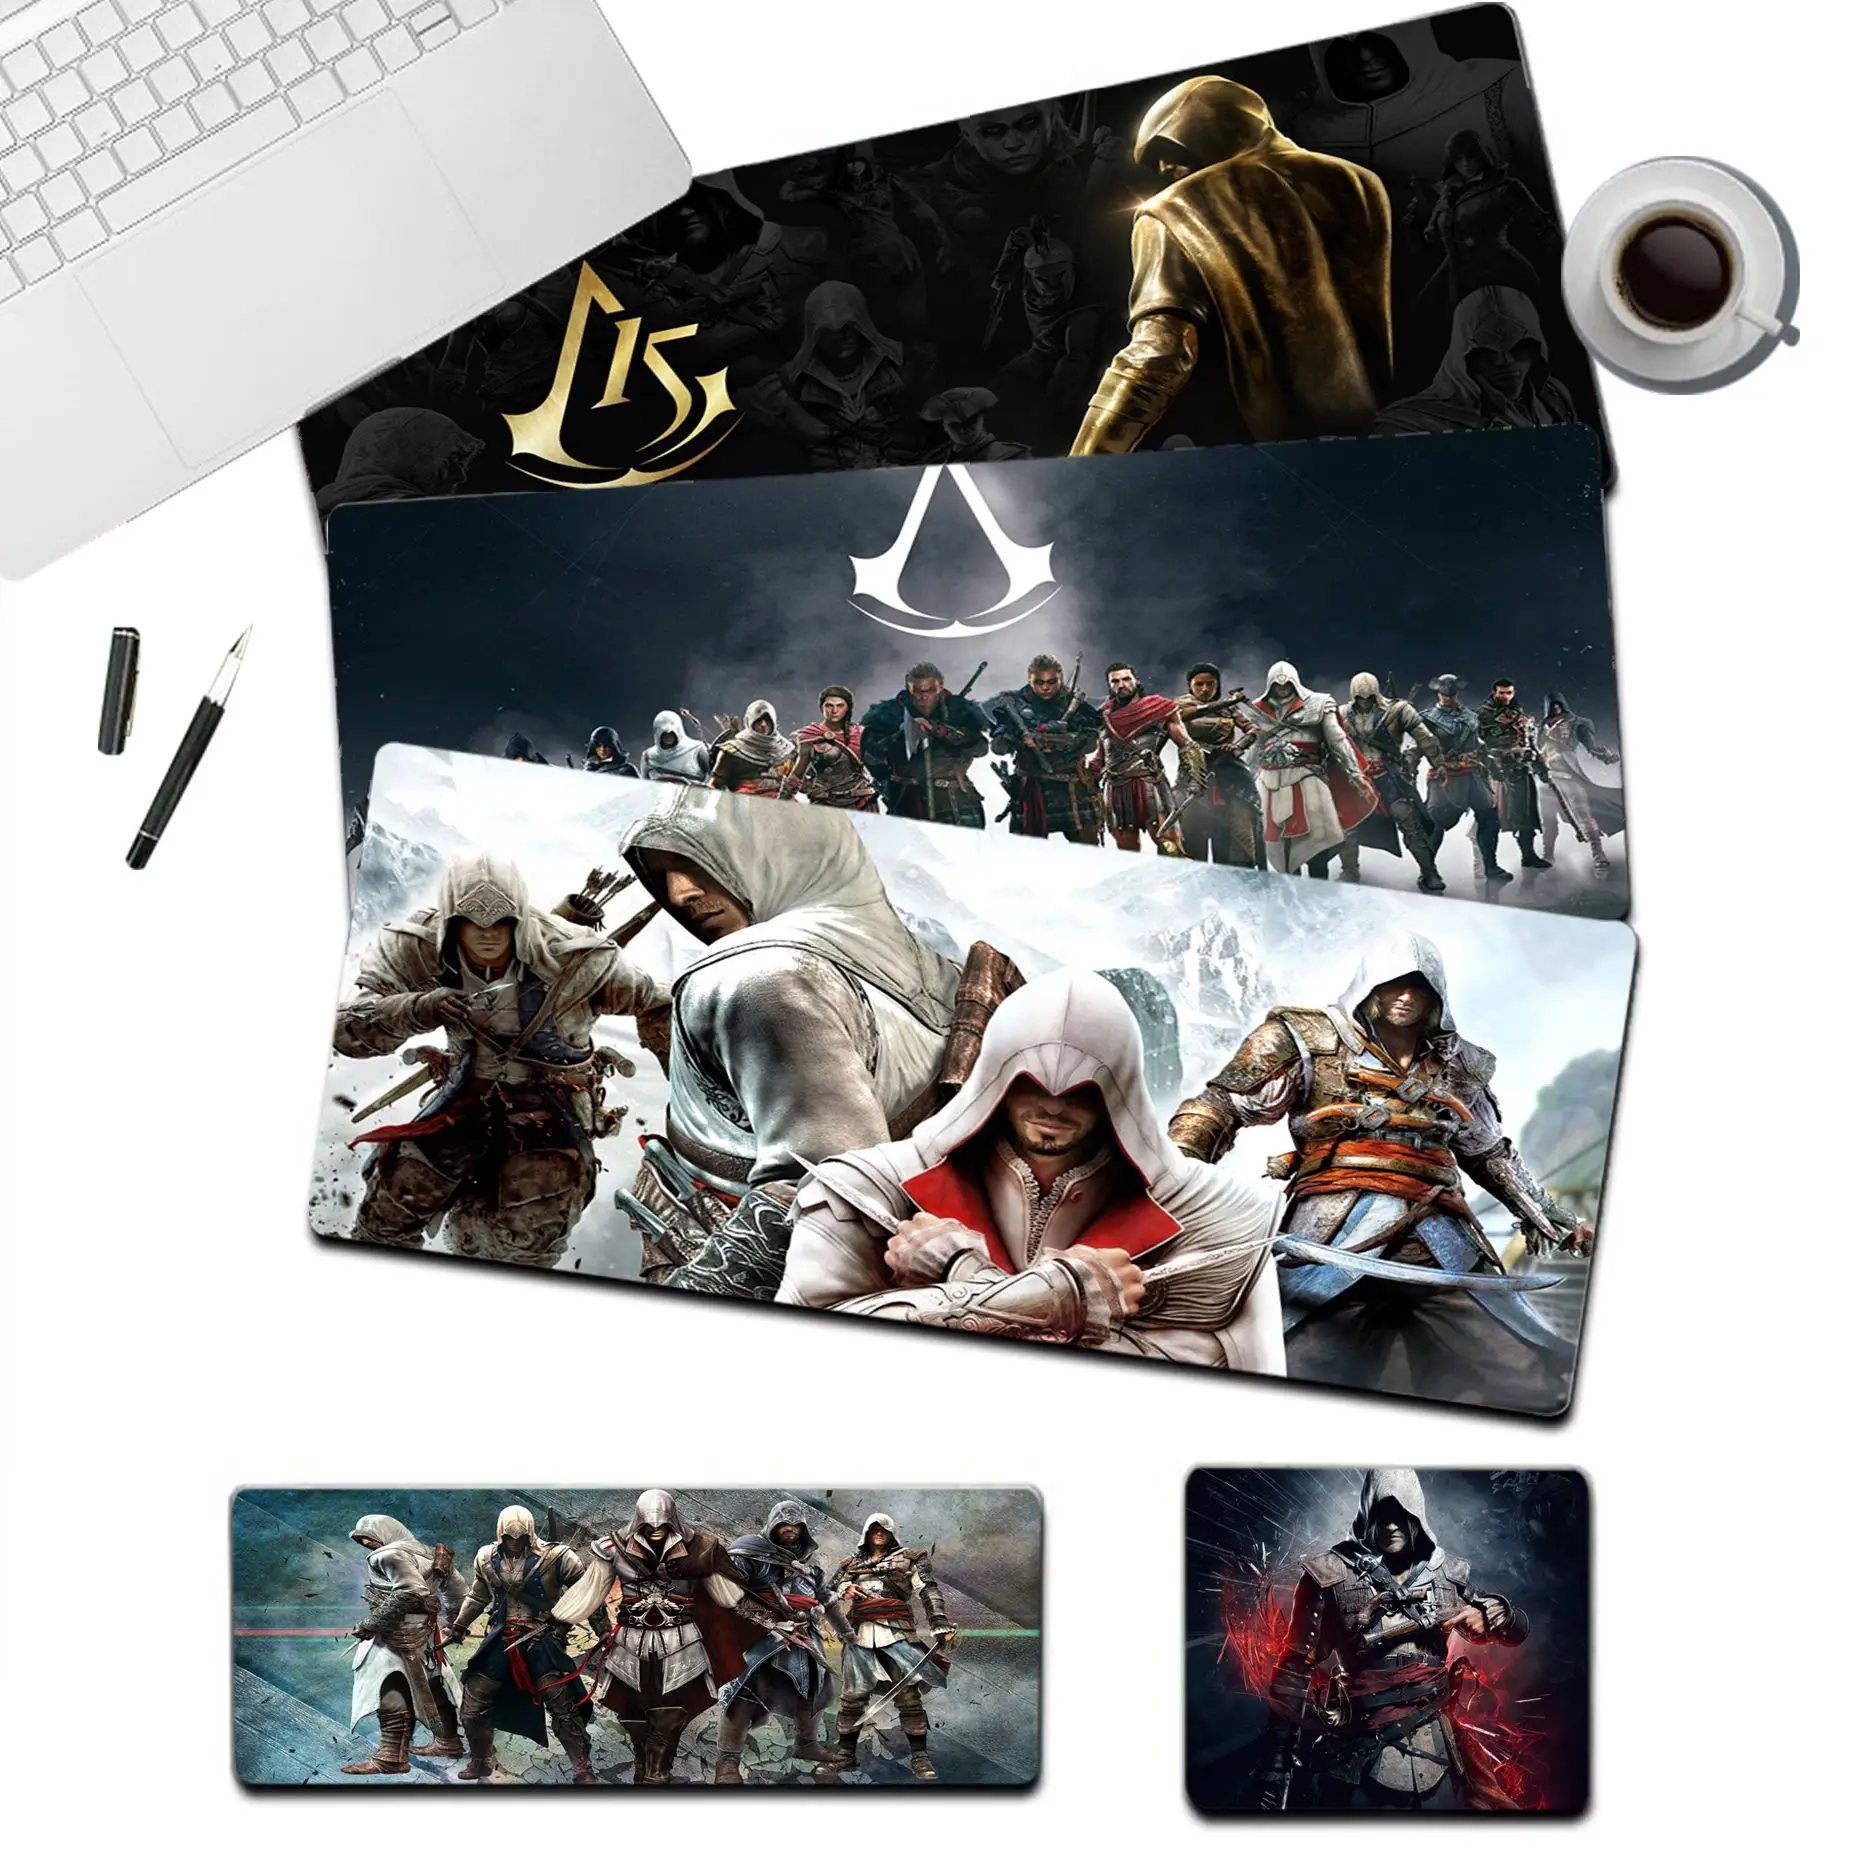 

A-Assassins Game C-creed Mousepad Funny Beautiful Anime Mouse Pad Mat Size For Kawaii Desk Teen Girls For Bedroom